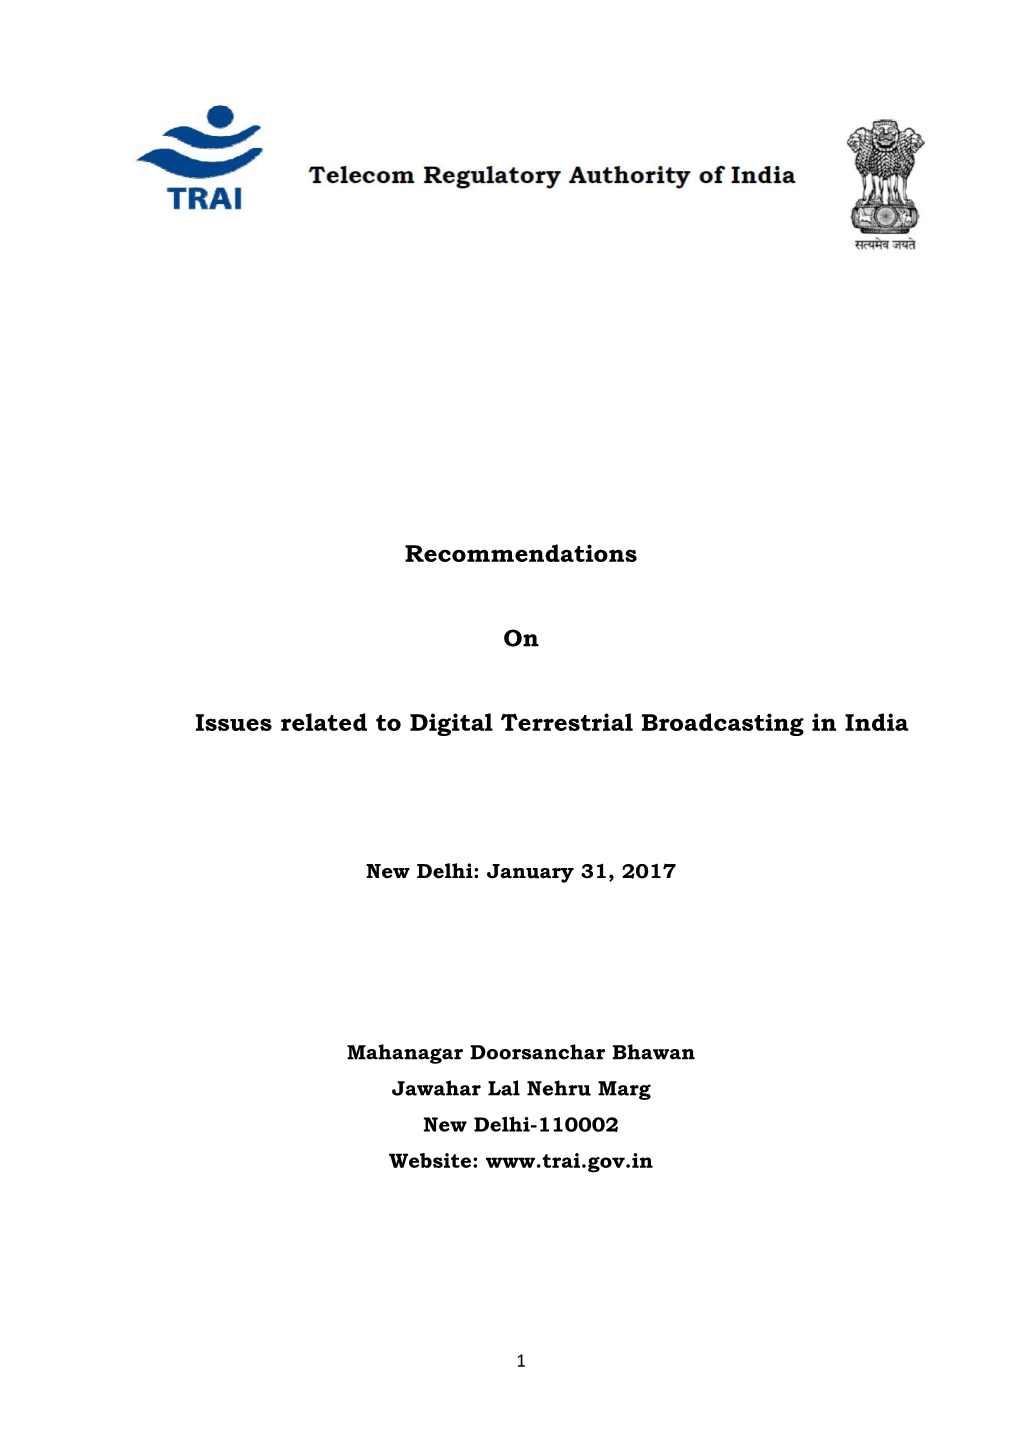 Recommendations on Issues Related to Digital Terrestrial Broadcasting In